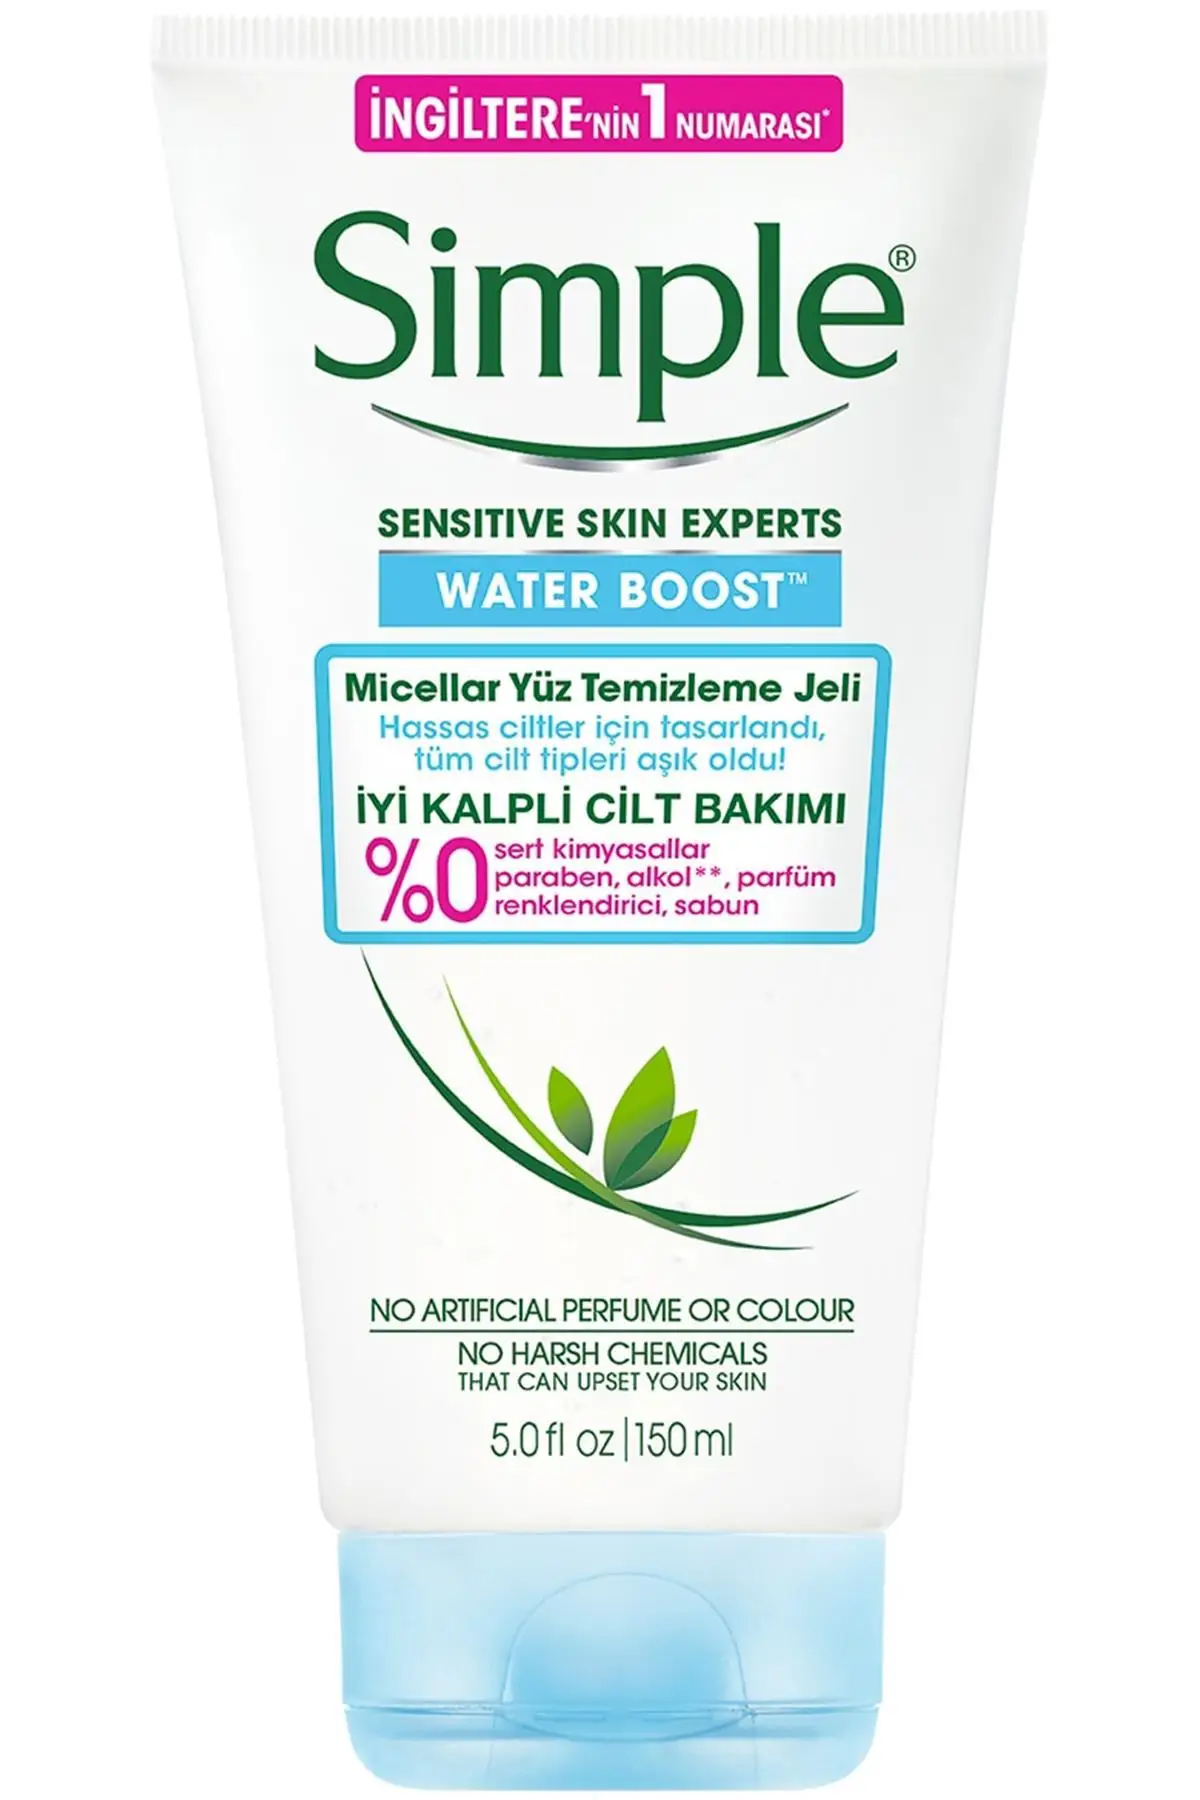 

Brand: Simple Water Boost Micellar Face Cleansing Gel 150 ml Category: Facial Cleanser